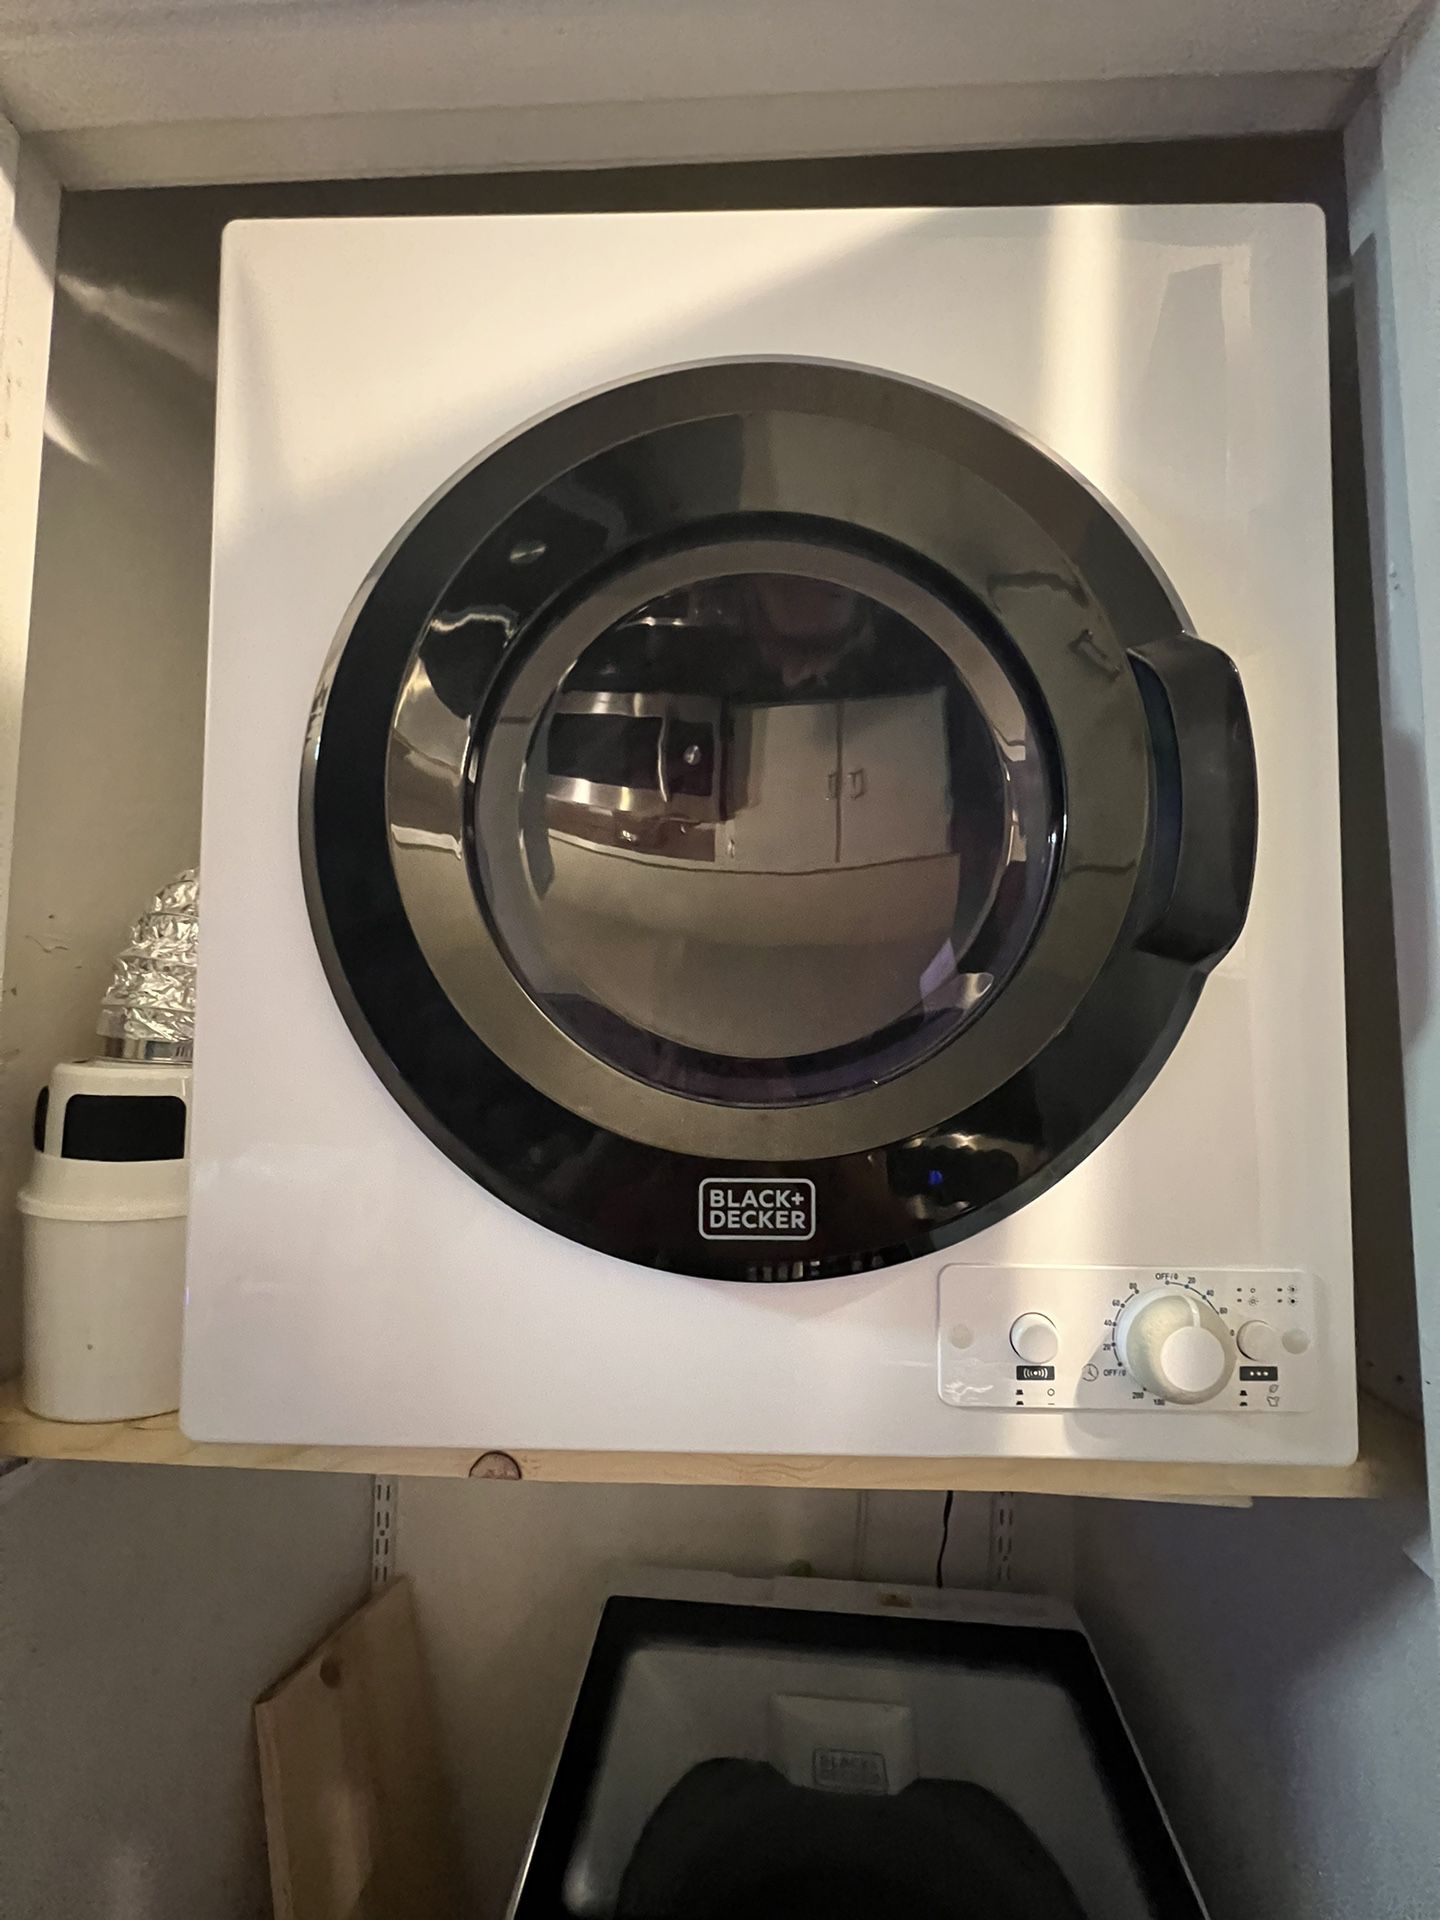 Portable Washer And Dryer for Sale in Portland, OR - OfferUp